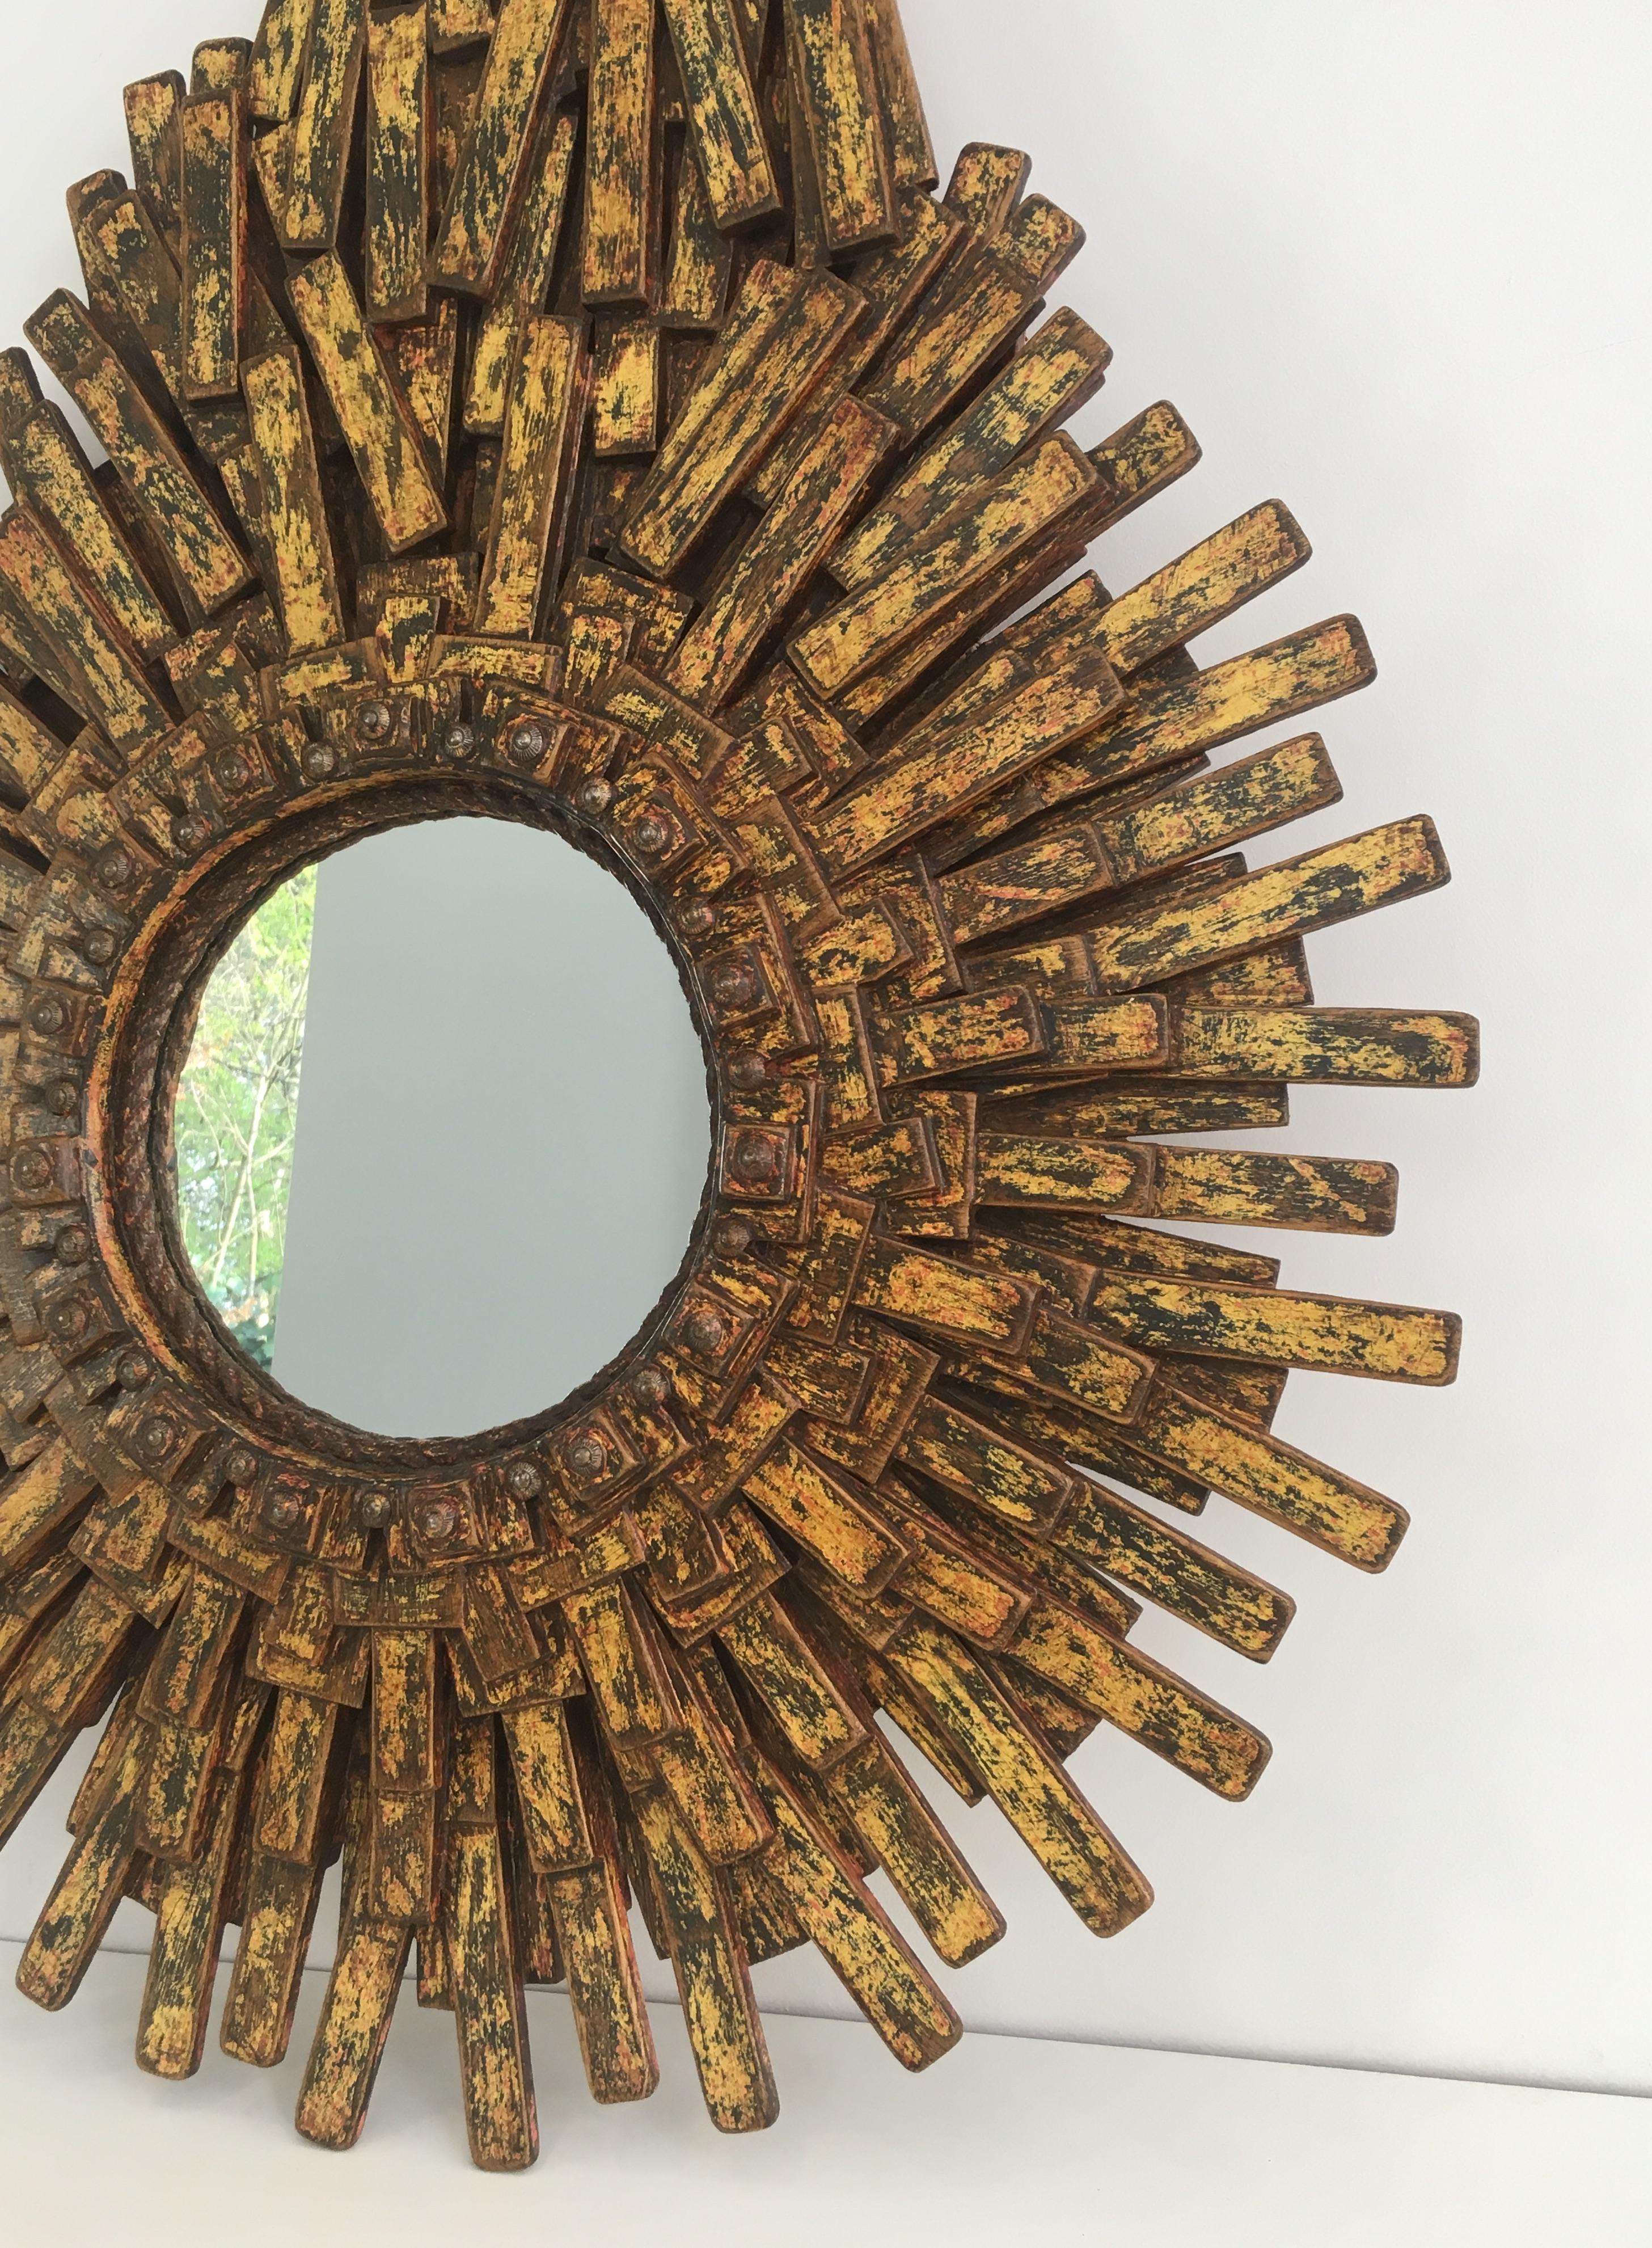 French Unique Brutalist Mirror Made of Painted Wood, Rope & Old Iron Nails, Signed Arbo For Sale